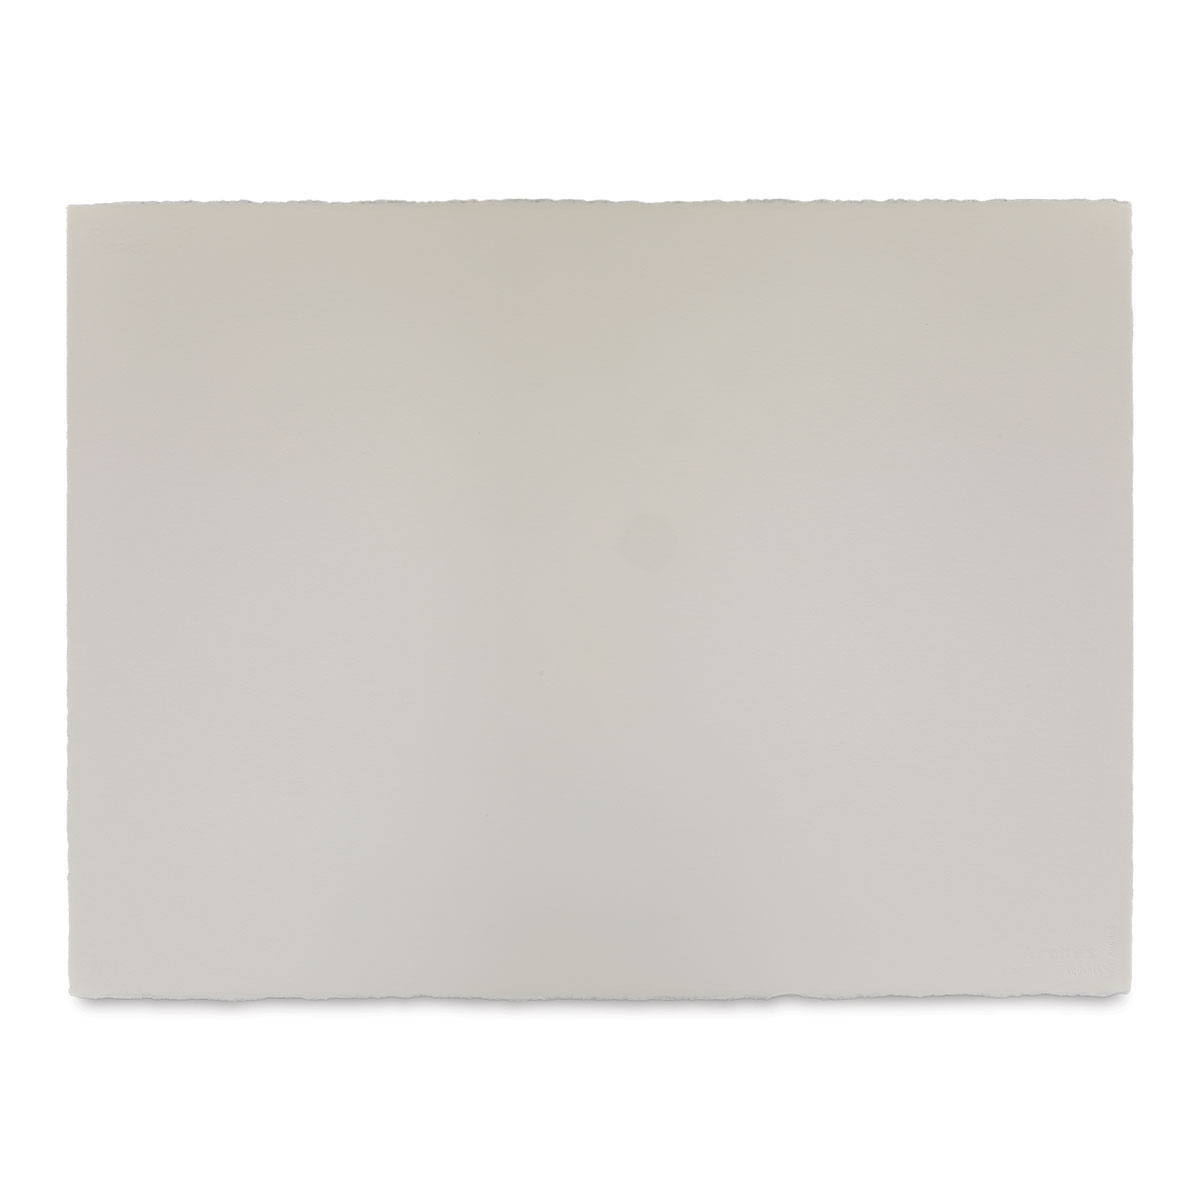 ARCHES Watercolor Paper - Cold Pressed - Natural White - 300 lb (640 gsm)  22x30 inch Pack of 25 